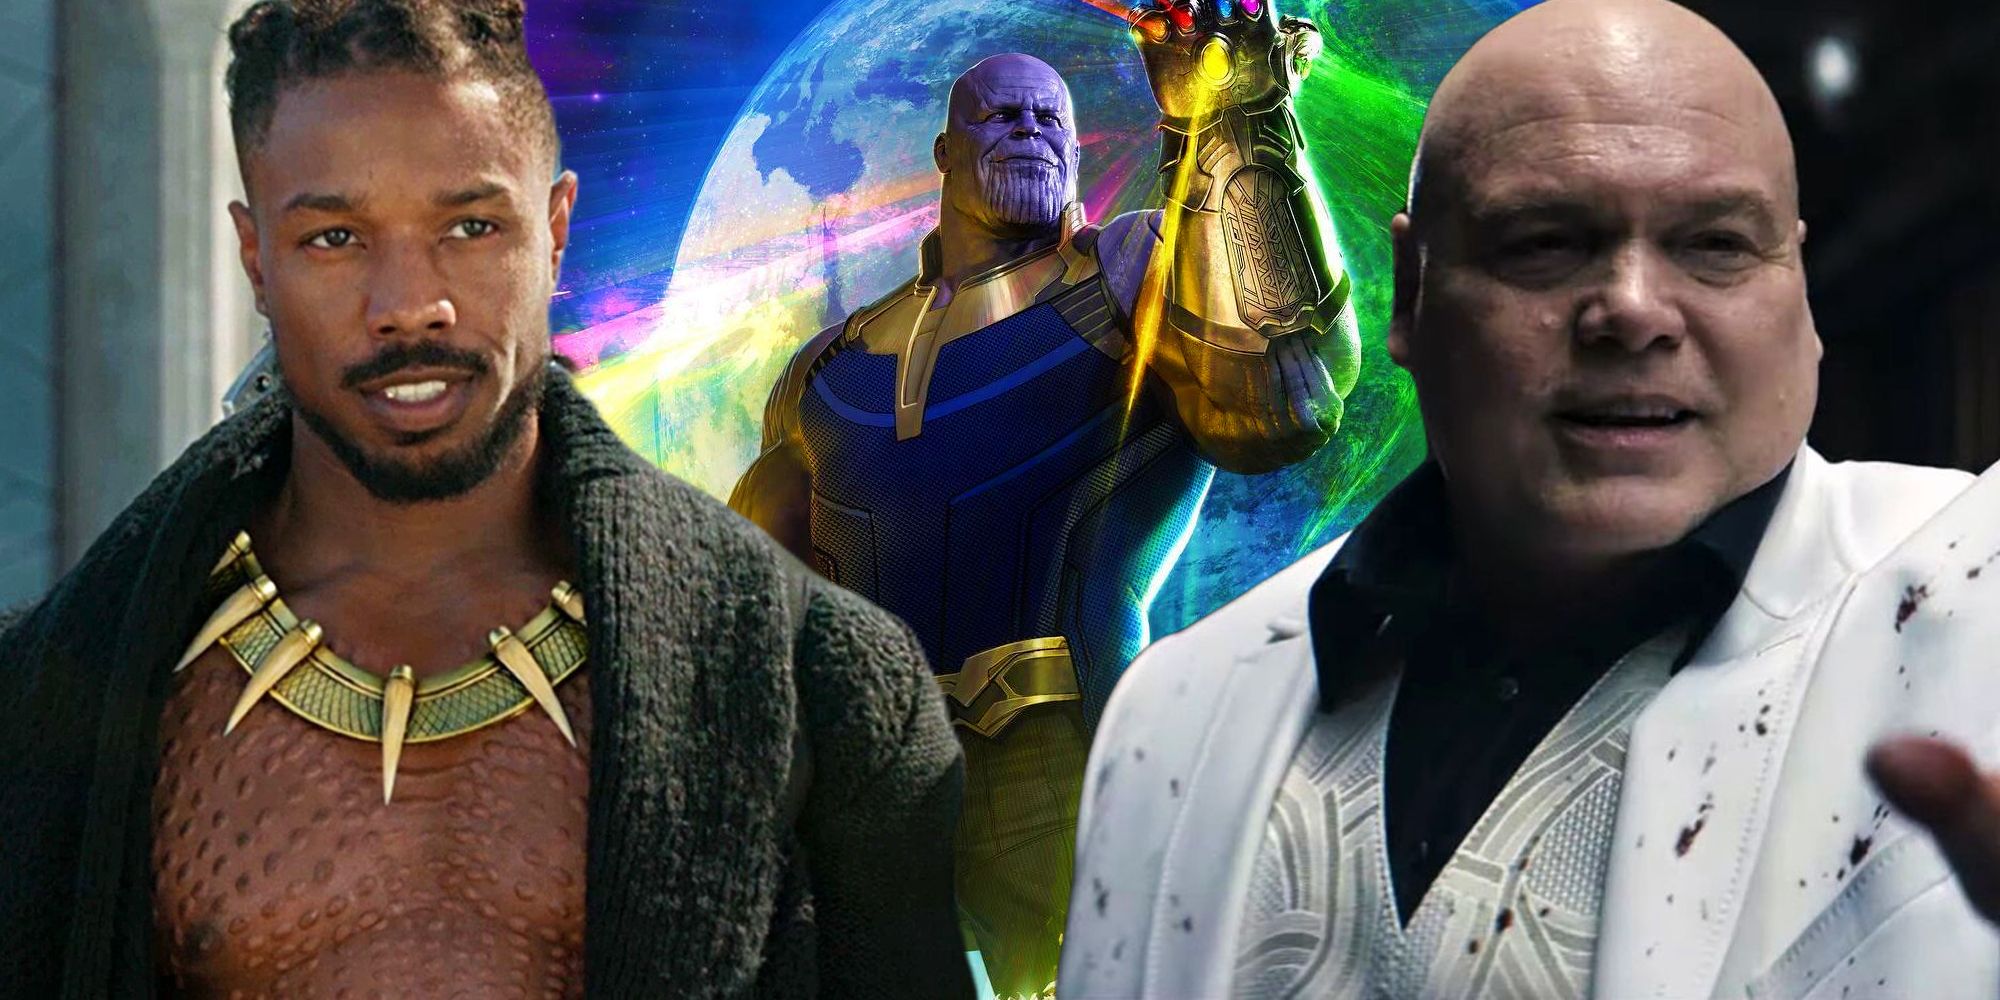 Thanos with the Infinity Gauntlet with Kingpin and Killmonger either side of him from their MCU appearances